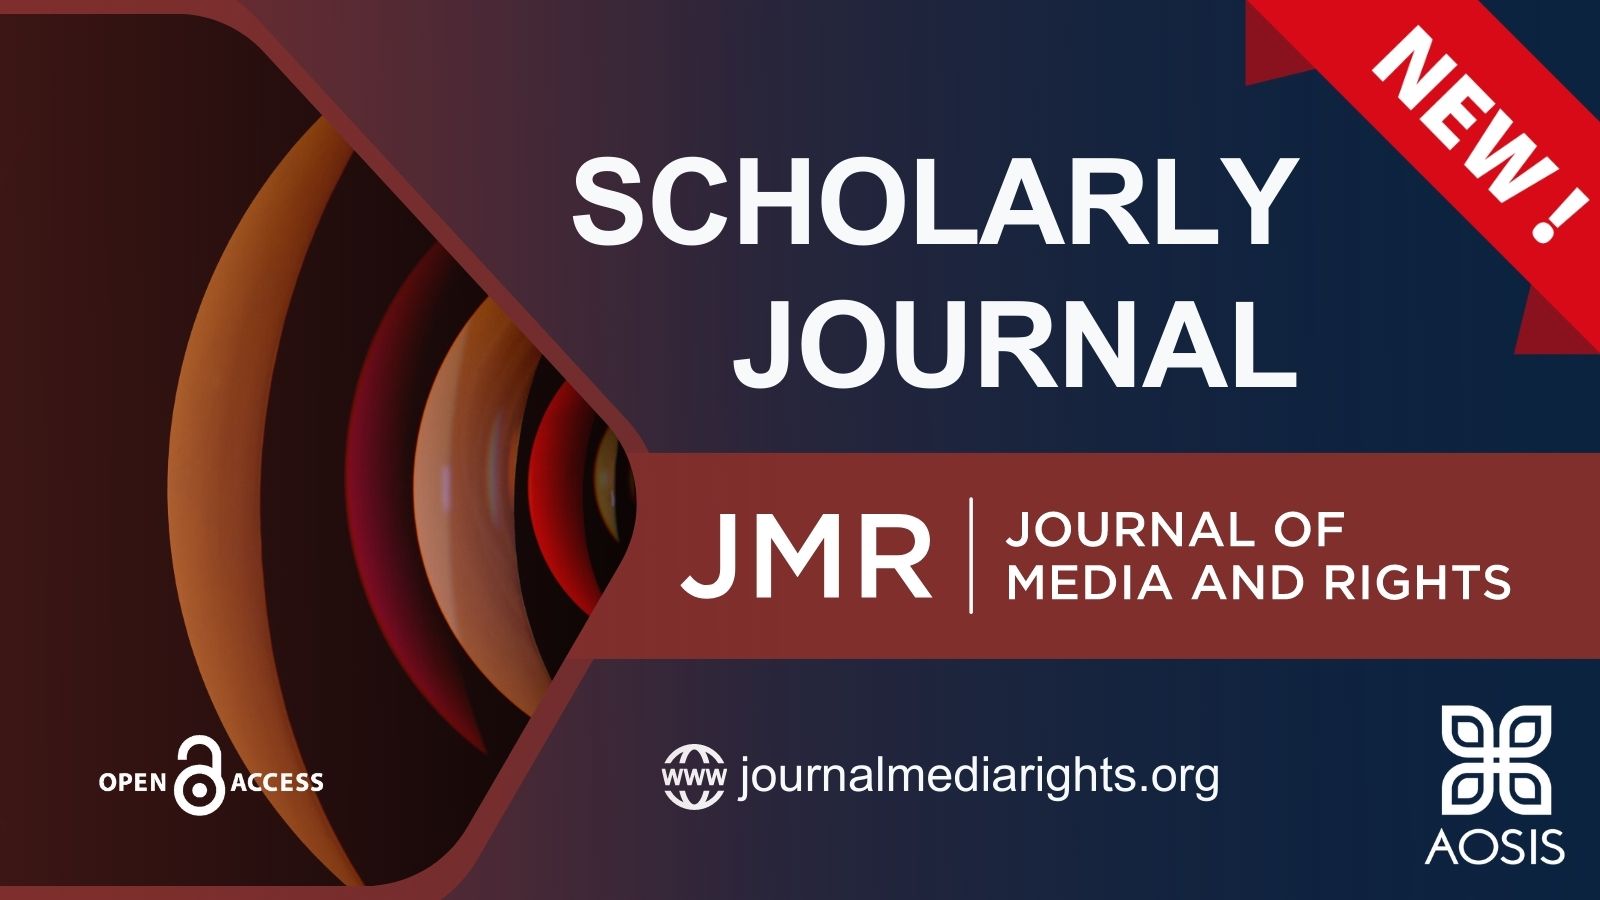 Journal of Media and Rights